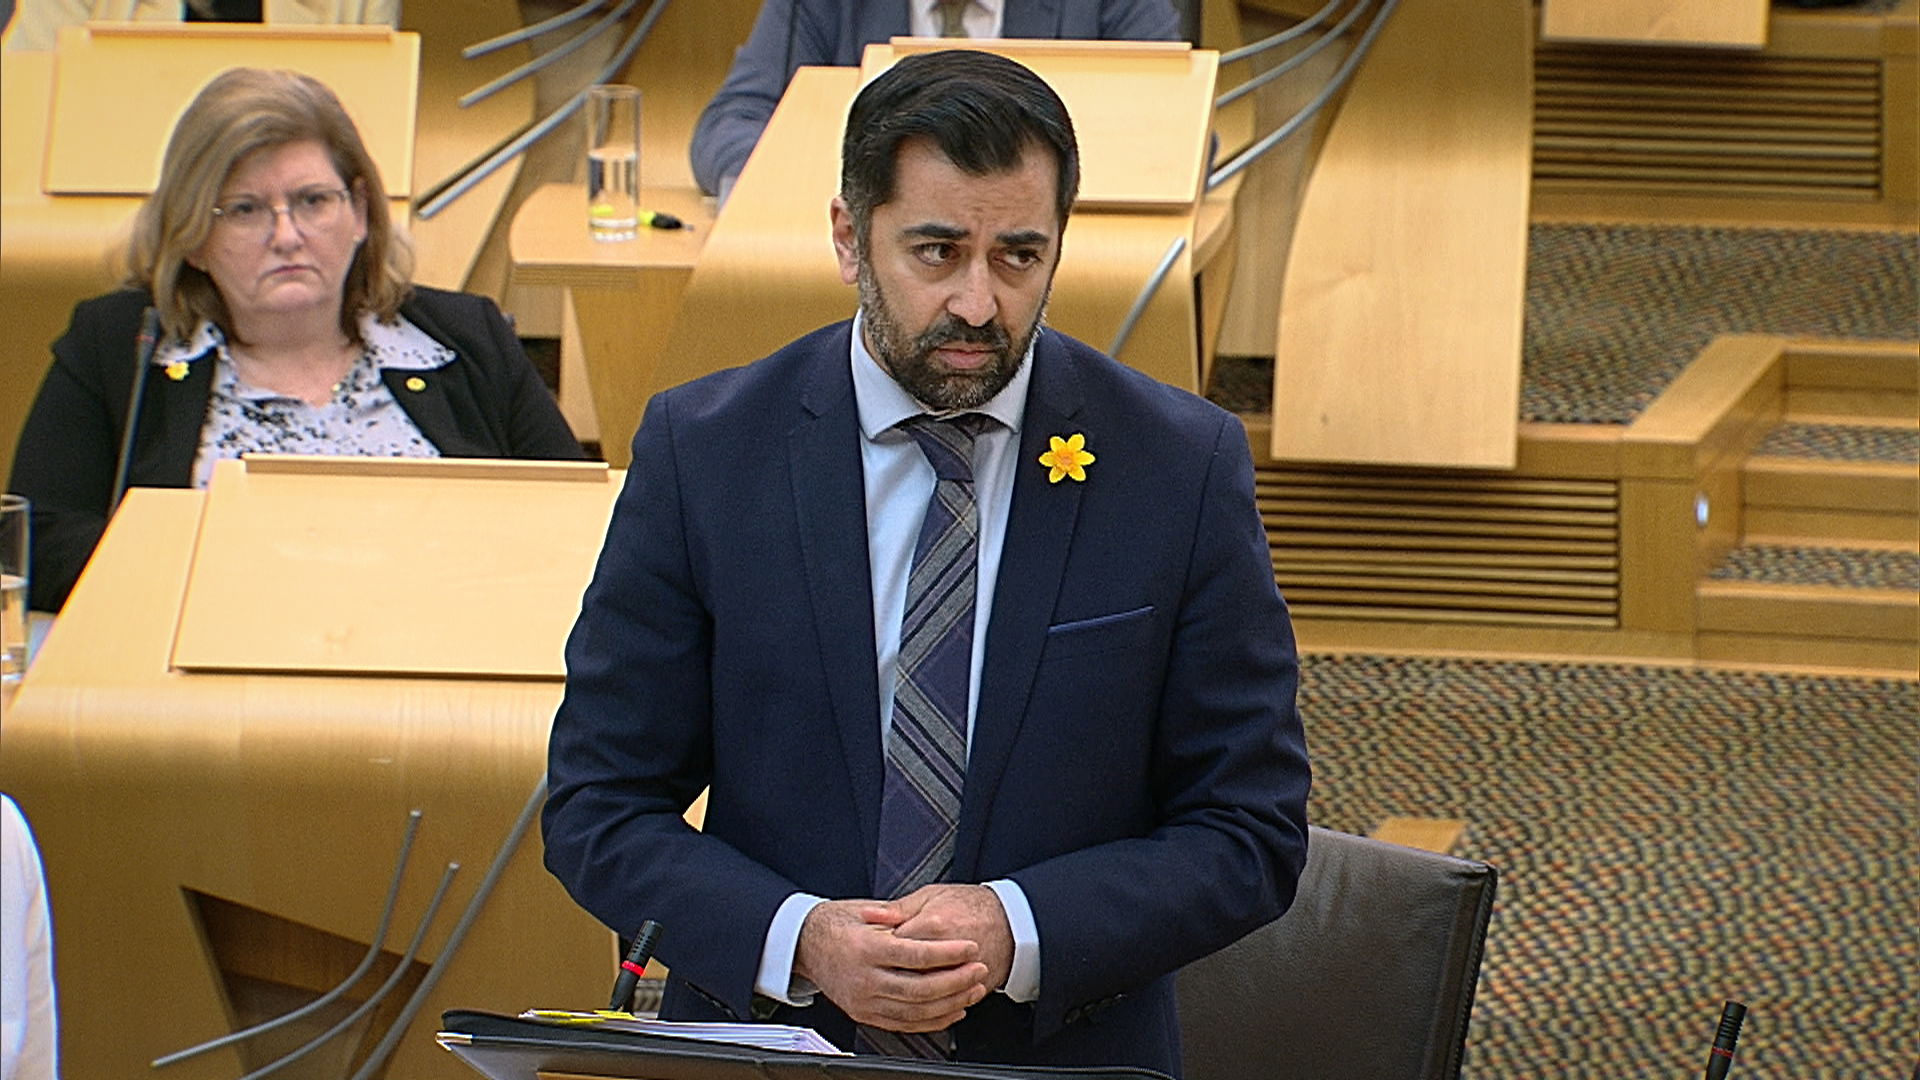 Humza Yousaf said council tax rises are 'unjustifiable'.